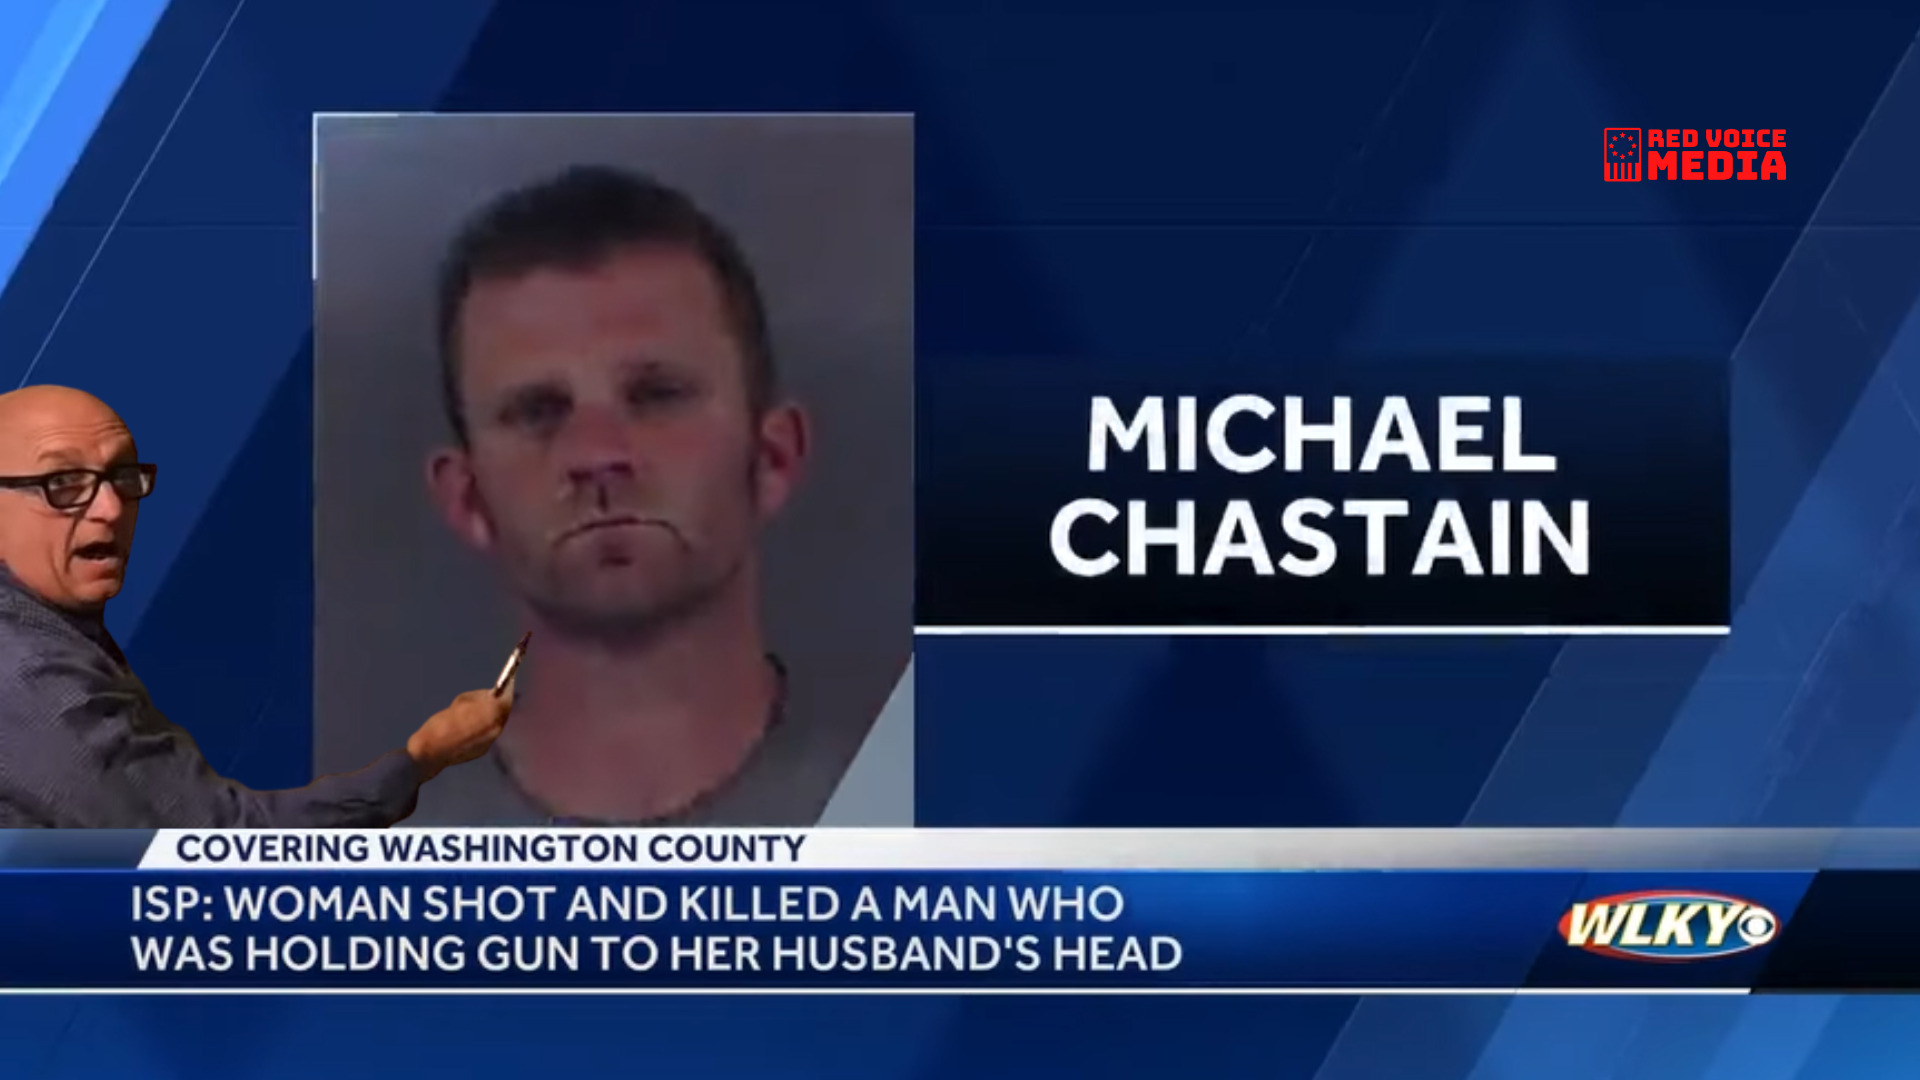 Ex-gunman confronts family, protective mother ends threat [VIDEOS]